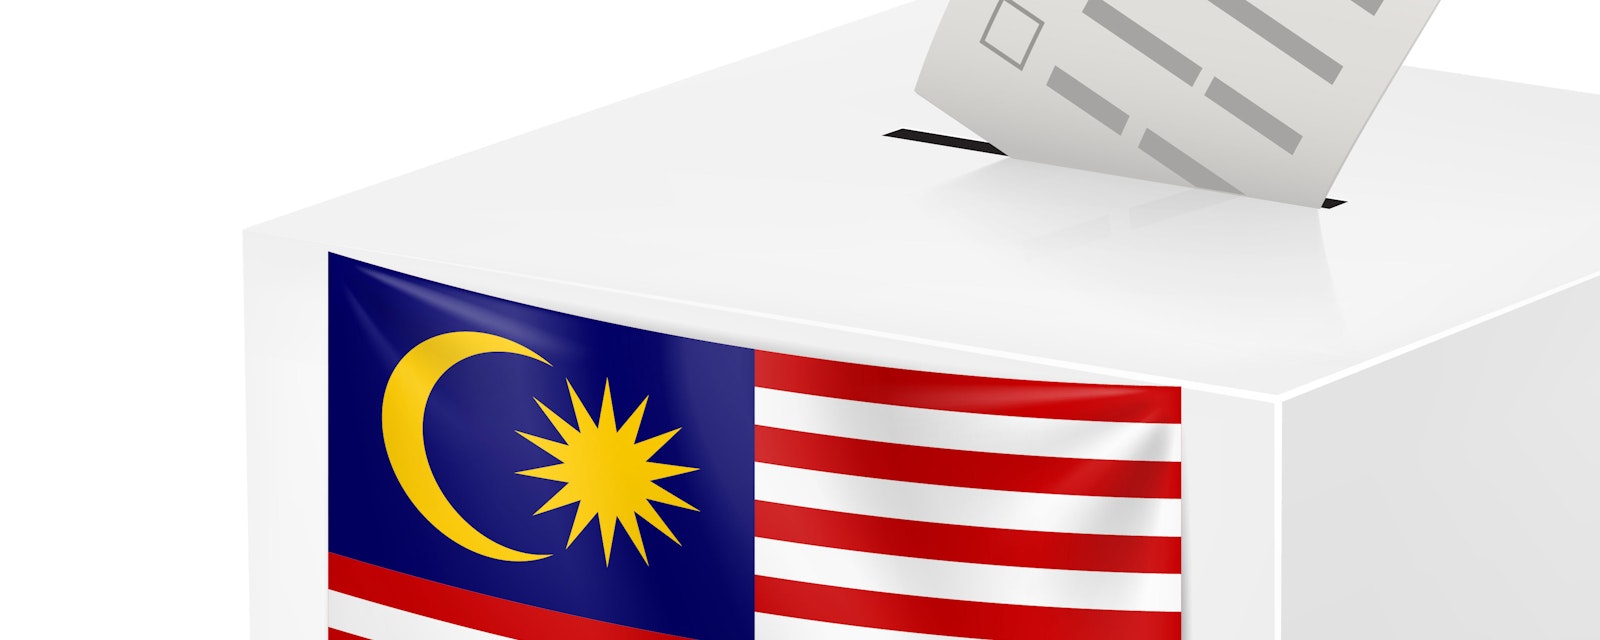 Illustration of voting booth in Malaysia